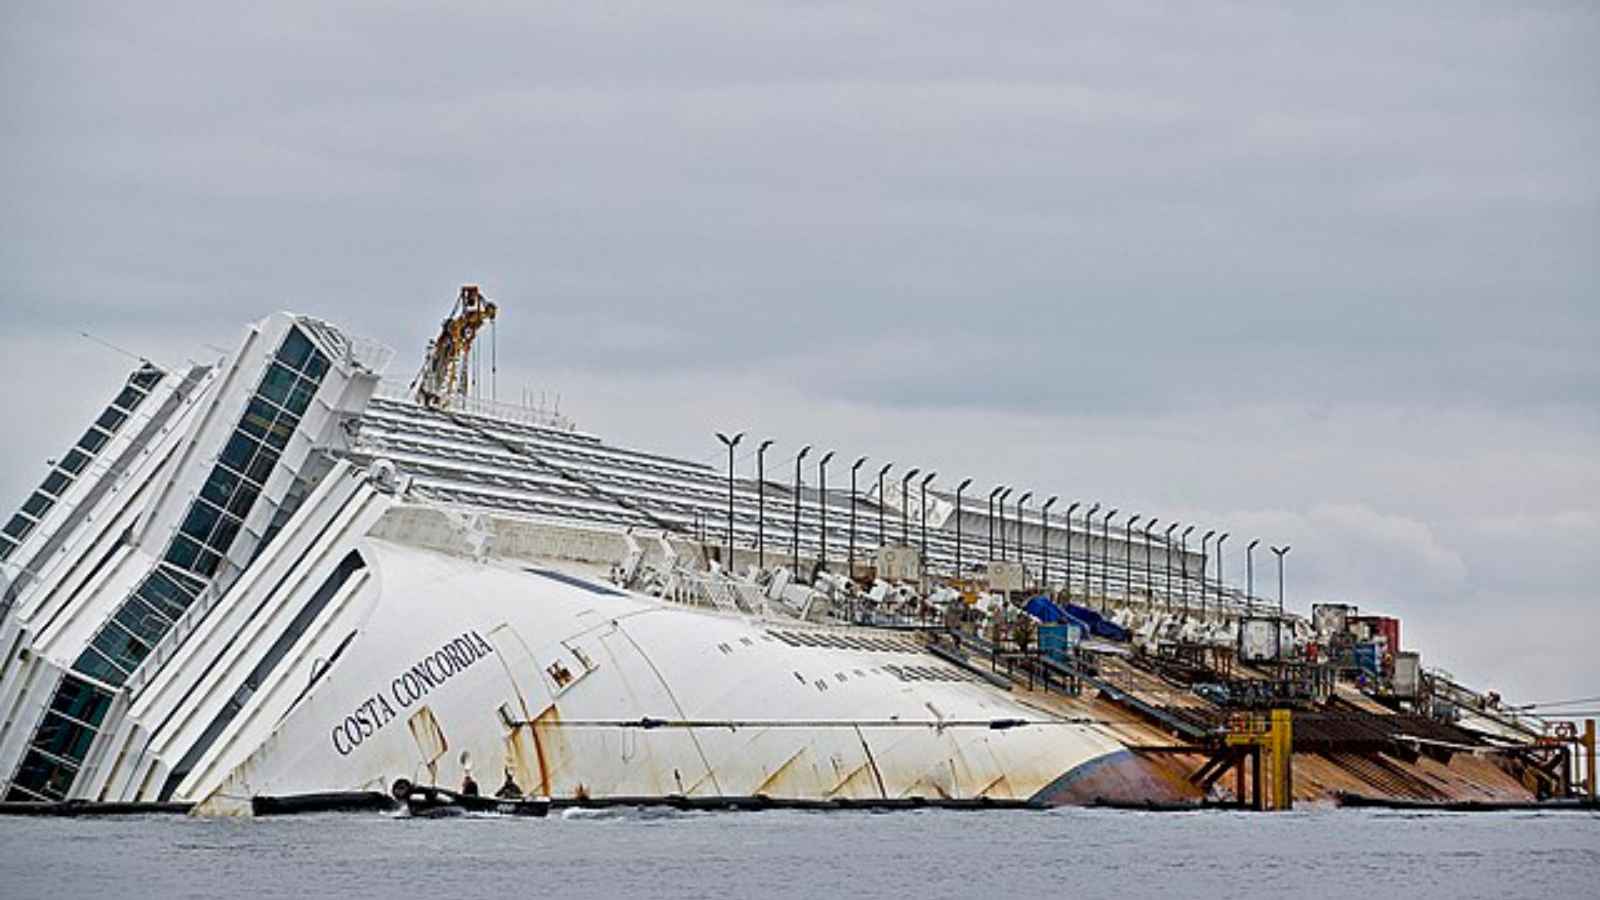 <p>In 2012, the Italian cruise ship Costa Concordia ran aground off the coast of Isola del Giglio in Tuscany, resulting in the death of 32 passengers and crew members. The disaster also had a major economic impact. The Costa Concordia was one of the largest and most expensive cruise ships in the world, with a price tag of $570 million. Its loss not only caused financial losses for the company but also affected the local economy and tourism in the area.</p><p>Additionally, the rescue operation was one of the largest and most complex maritime operations ever carried out. It required a multinational effort involving divers, helicopters, and specialized equipment to safely evacuate over 4,000 passengers and crew members from the partially submerged ship. The Costa Concordia disaster was primarily due to human error. The captain’s negligence and lack of proper emergency procedures contributed to this tragedy. It also highlighted the need for stricter regulations on ship navigation and safety protocols.</p>